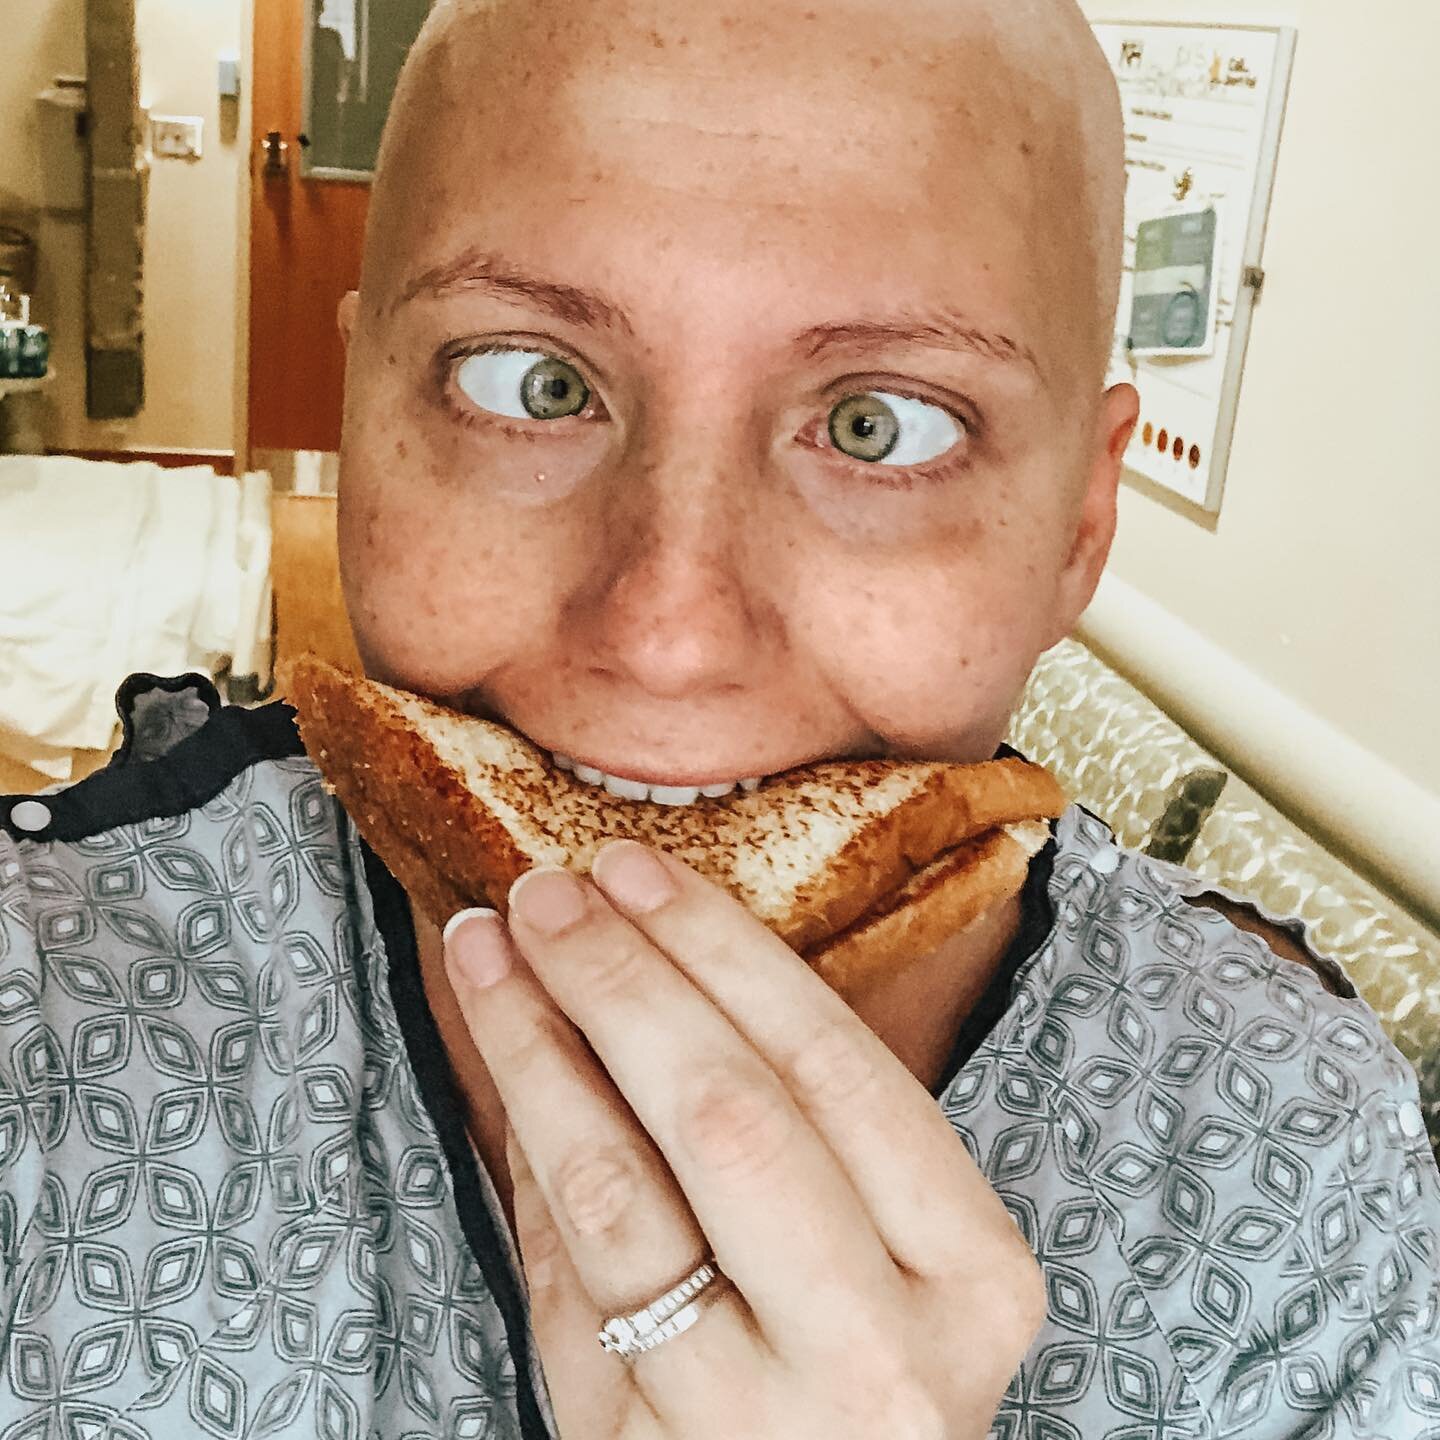 That first bite feeling after you haven&rsquo;t been allowed to eat for seven days 😜 The infection is clearing 🙌🏻 Thank you so much for your prayers, gang!